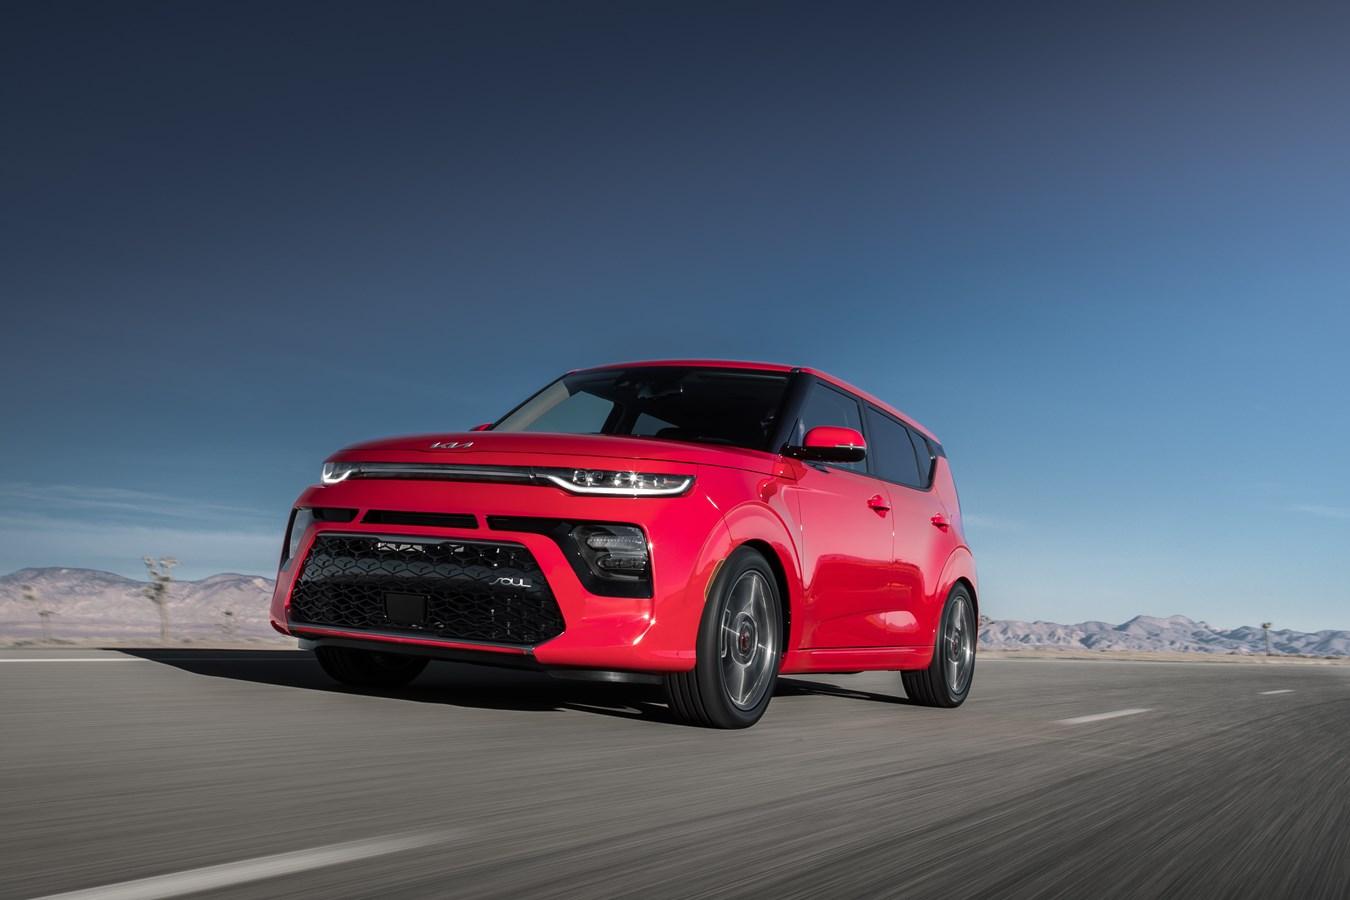 Image of a red Soul courtesy of Kia.